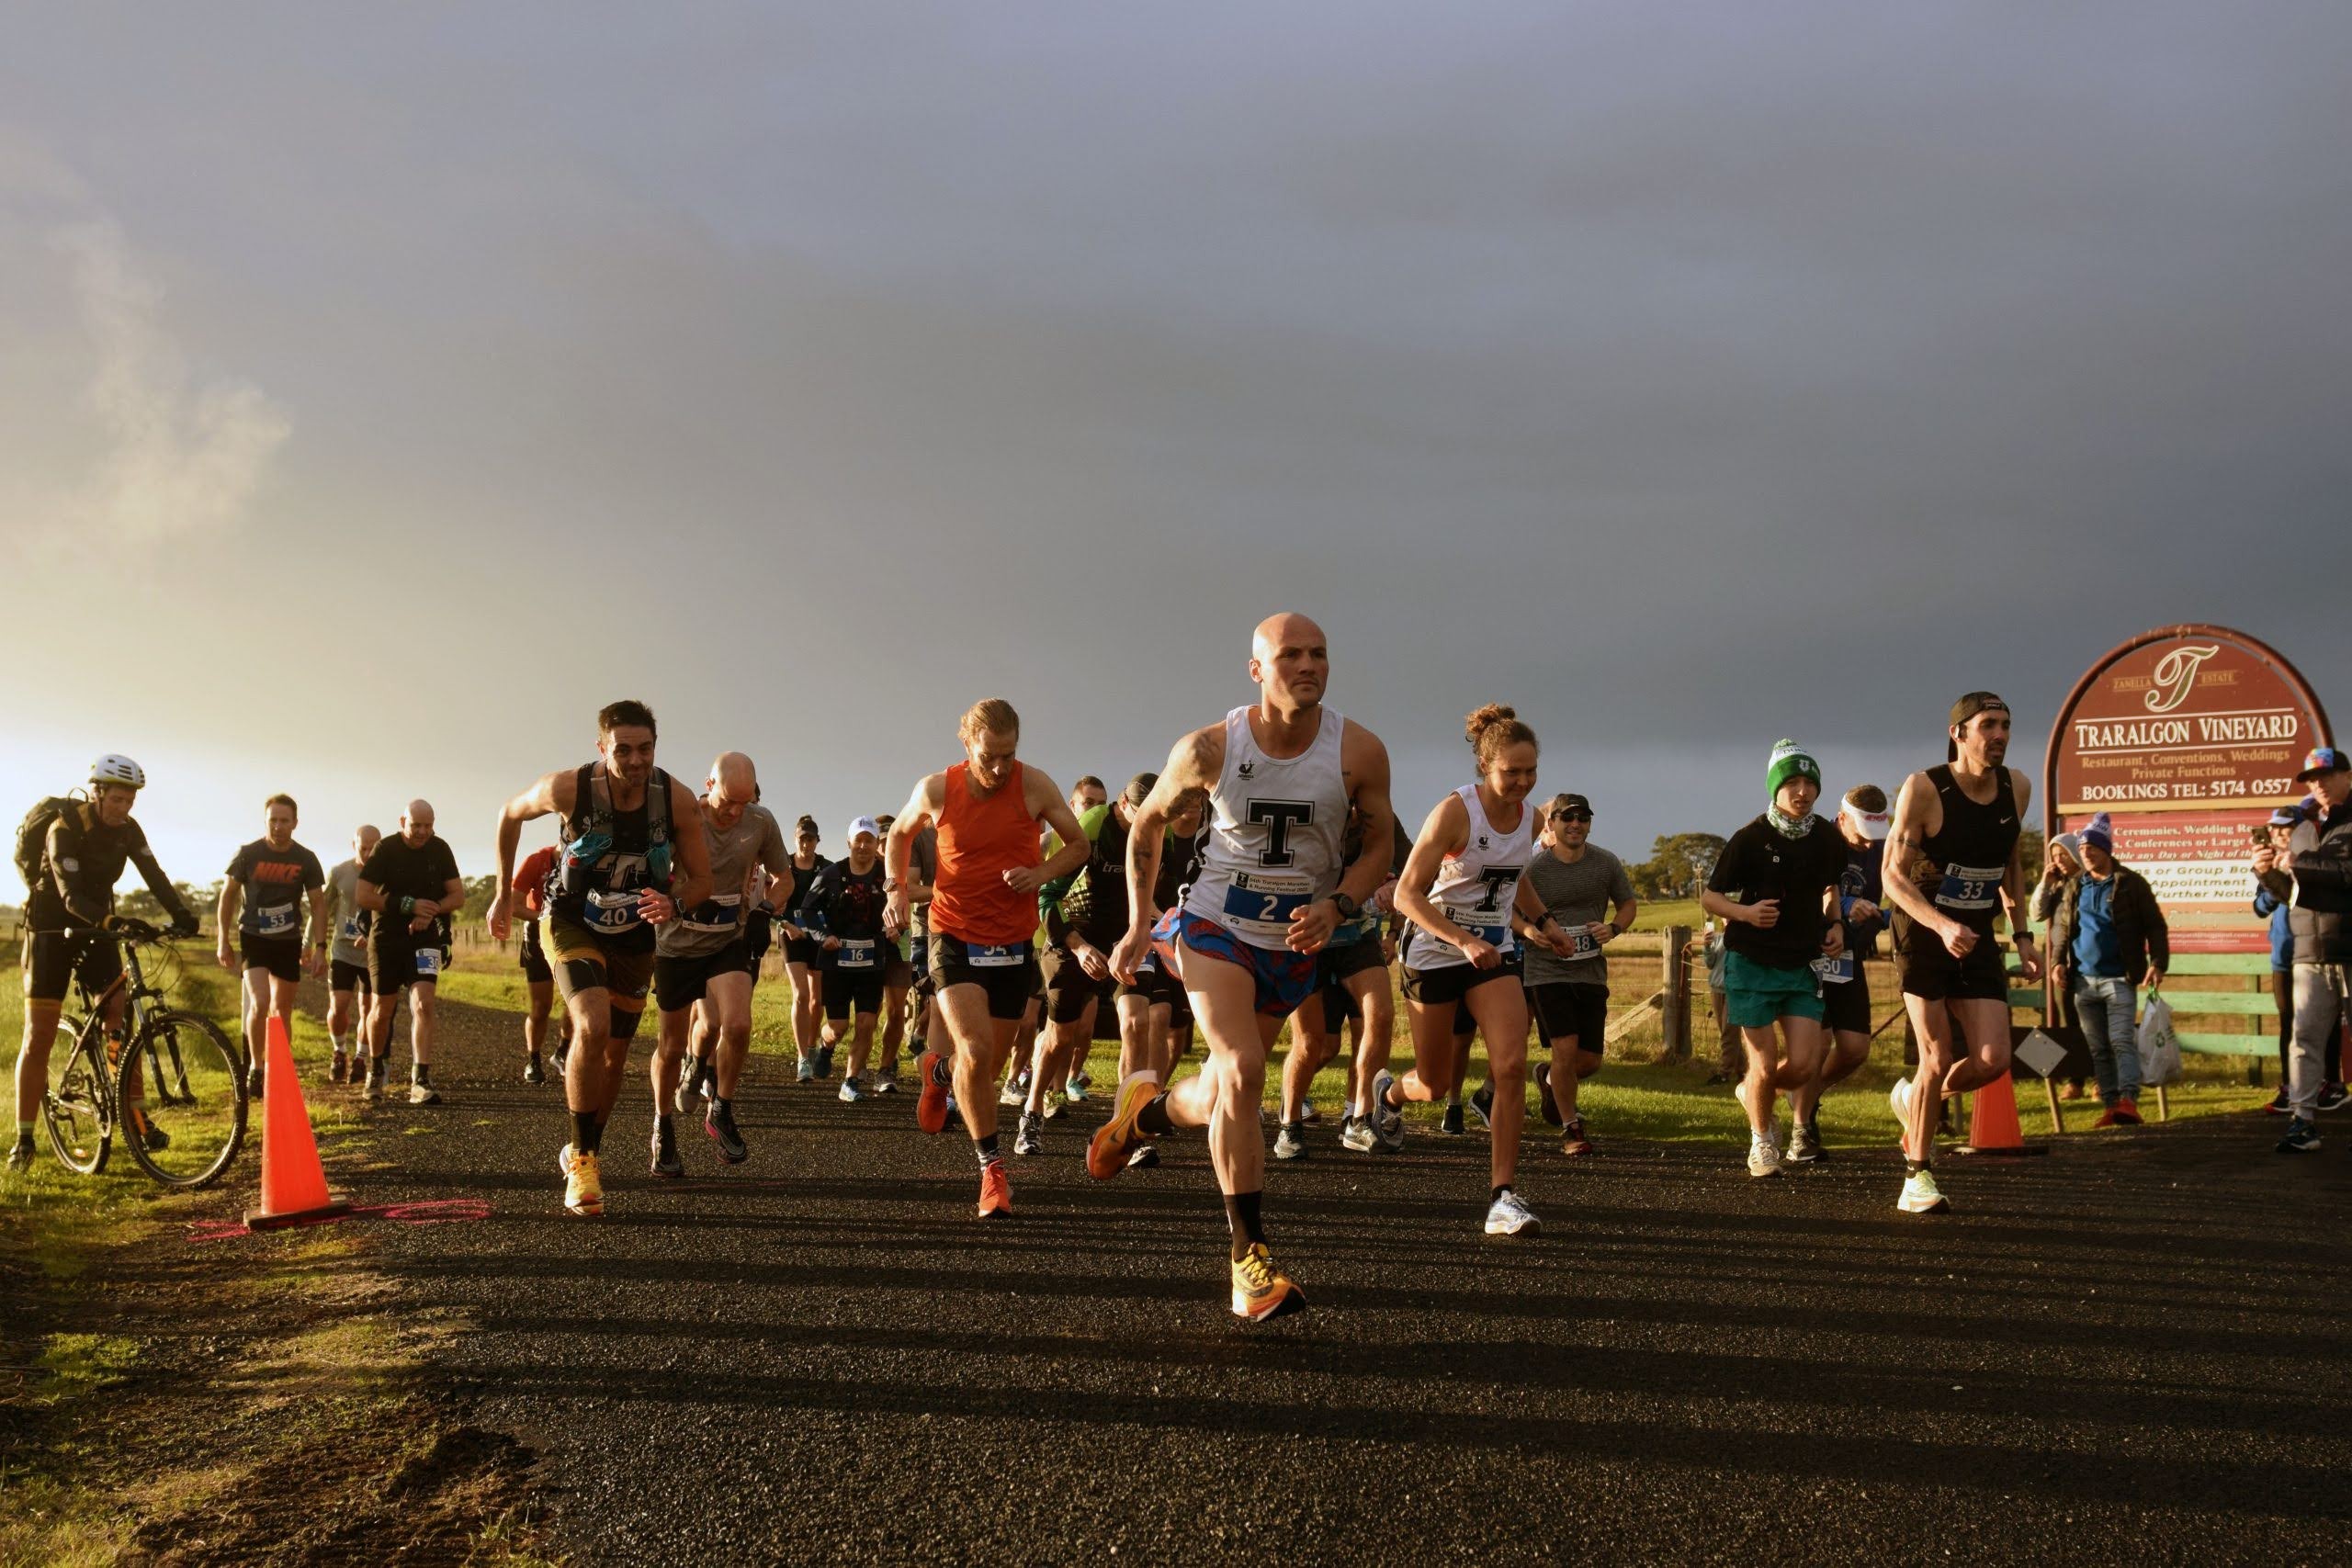 Traralgon Harriers